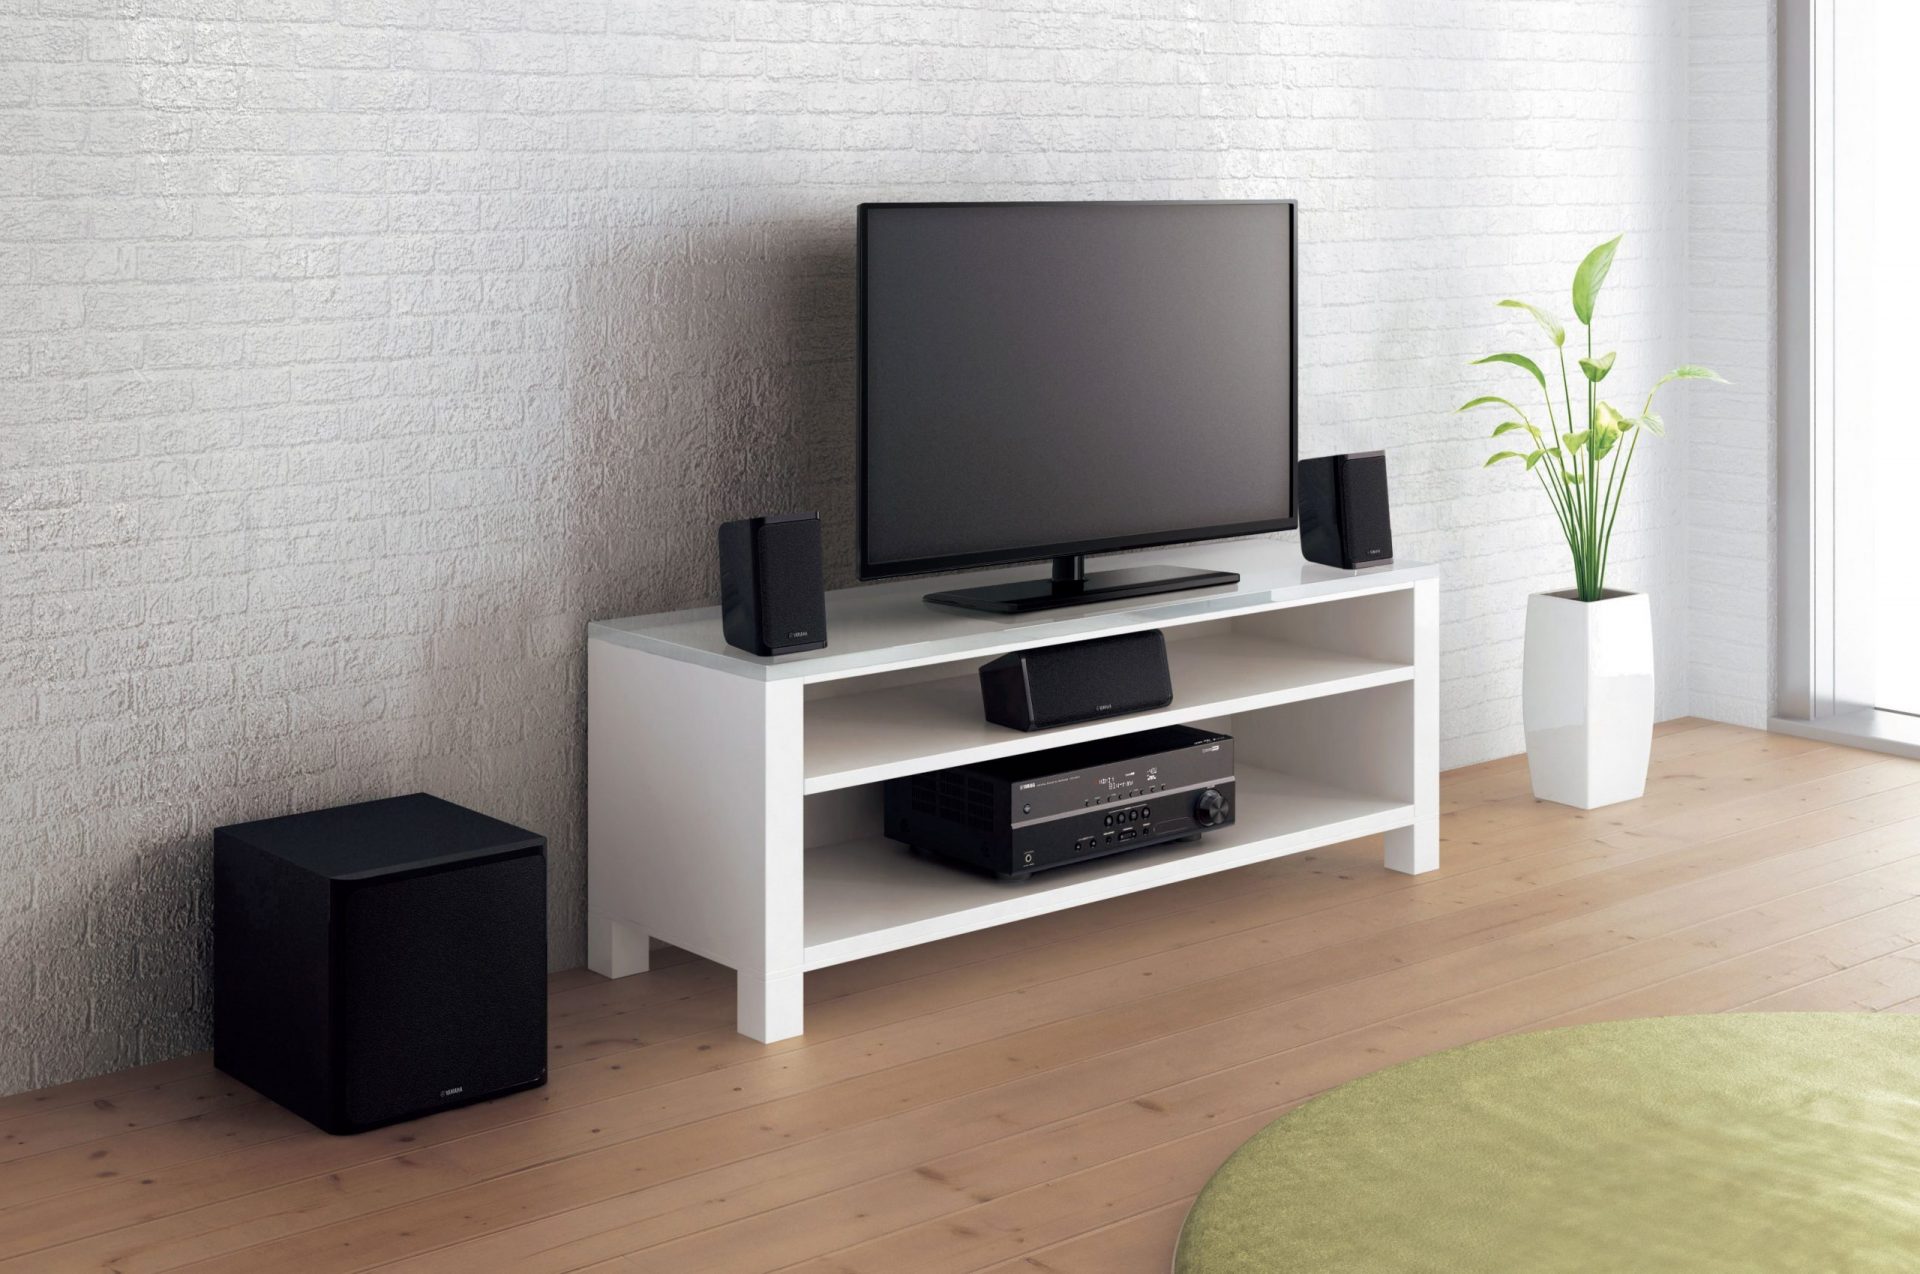 Hệ thống Home Theater 5.1 Yamaha YHT-1840